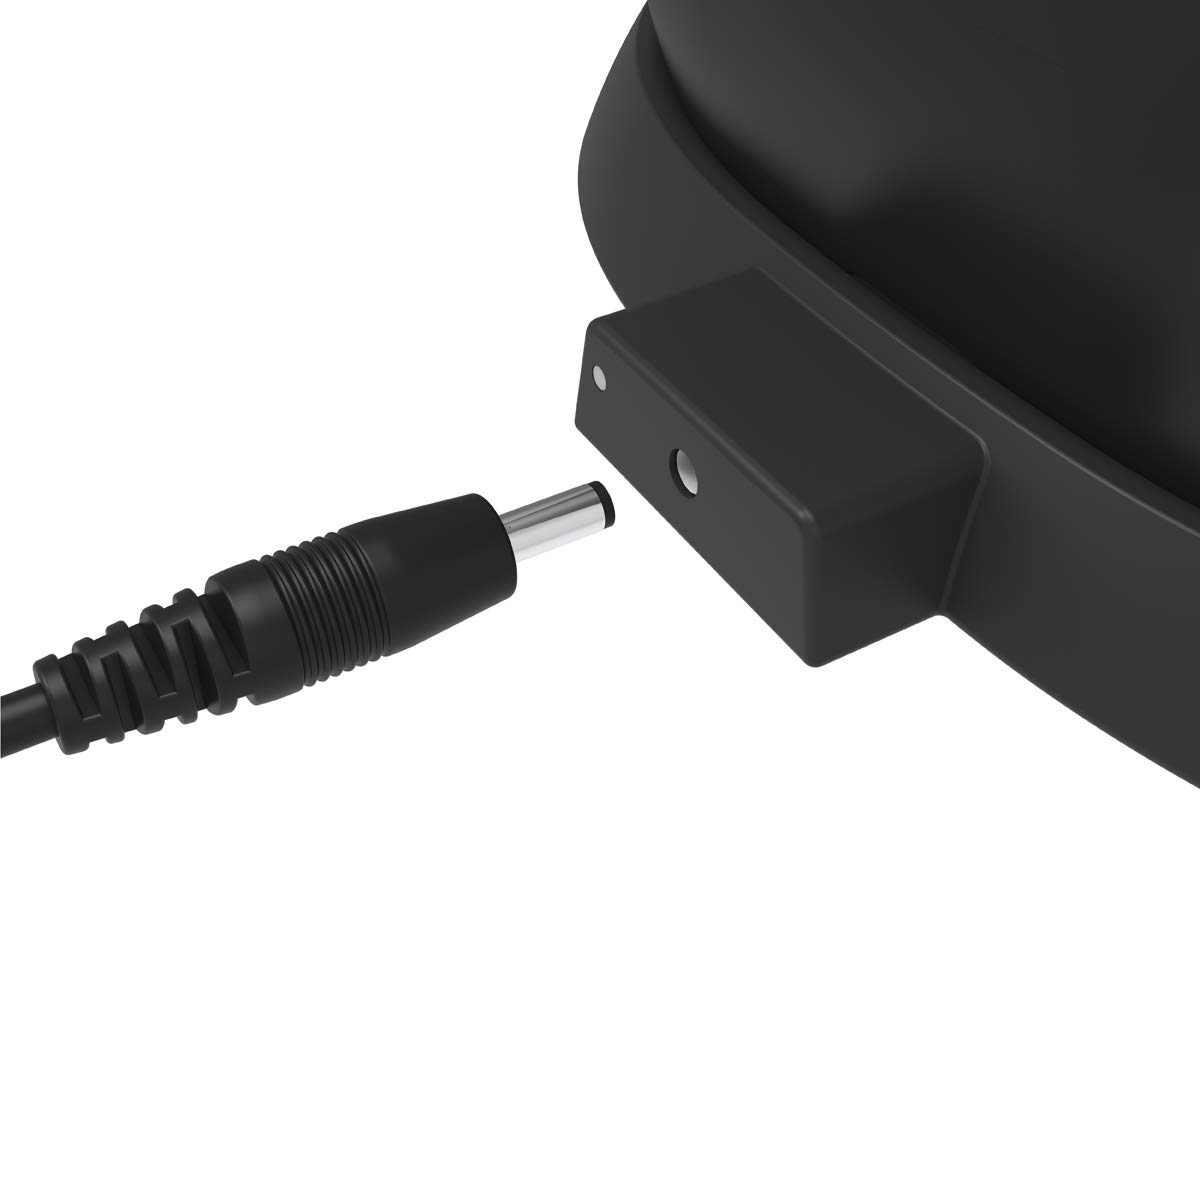 Soarking Charging Base for Sonos Move with 45W Adapter and 6.6 Feet Cable(Black)